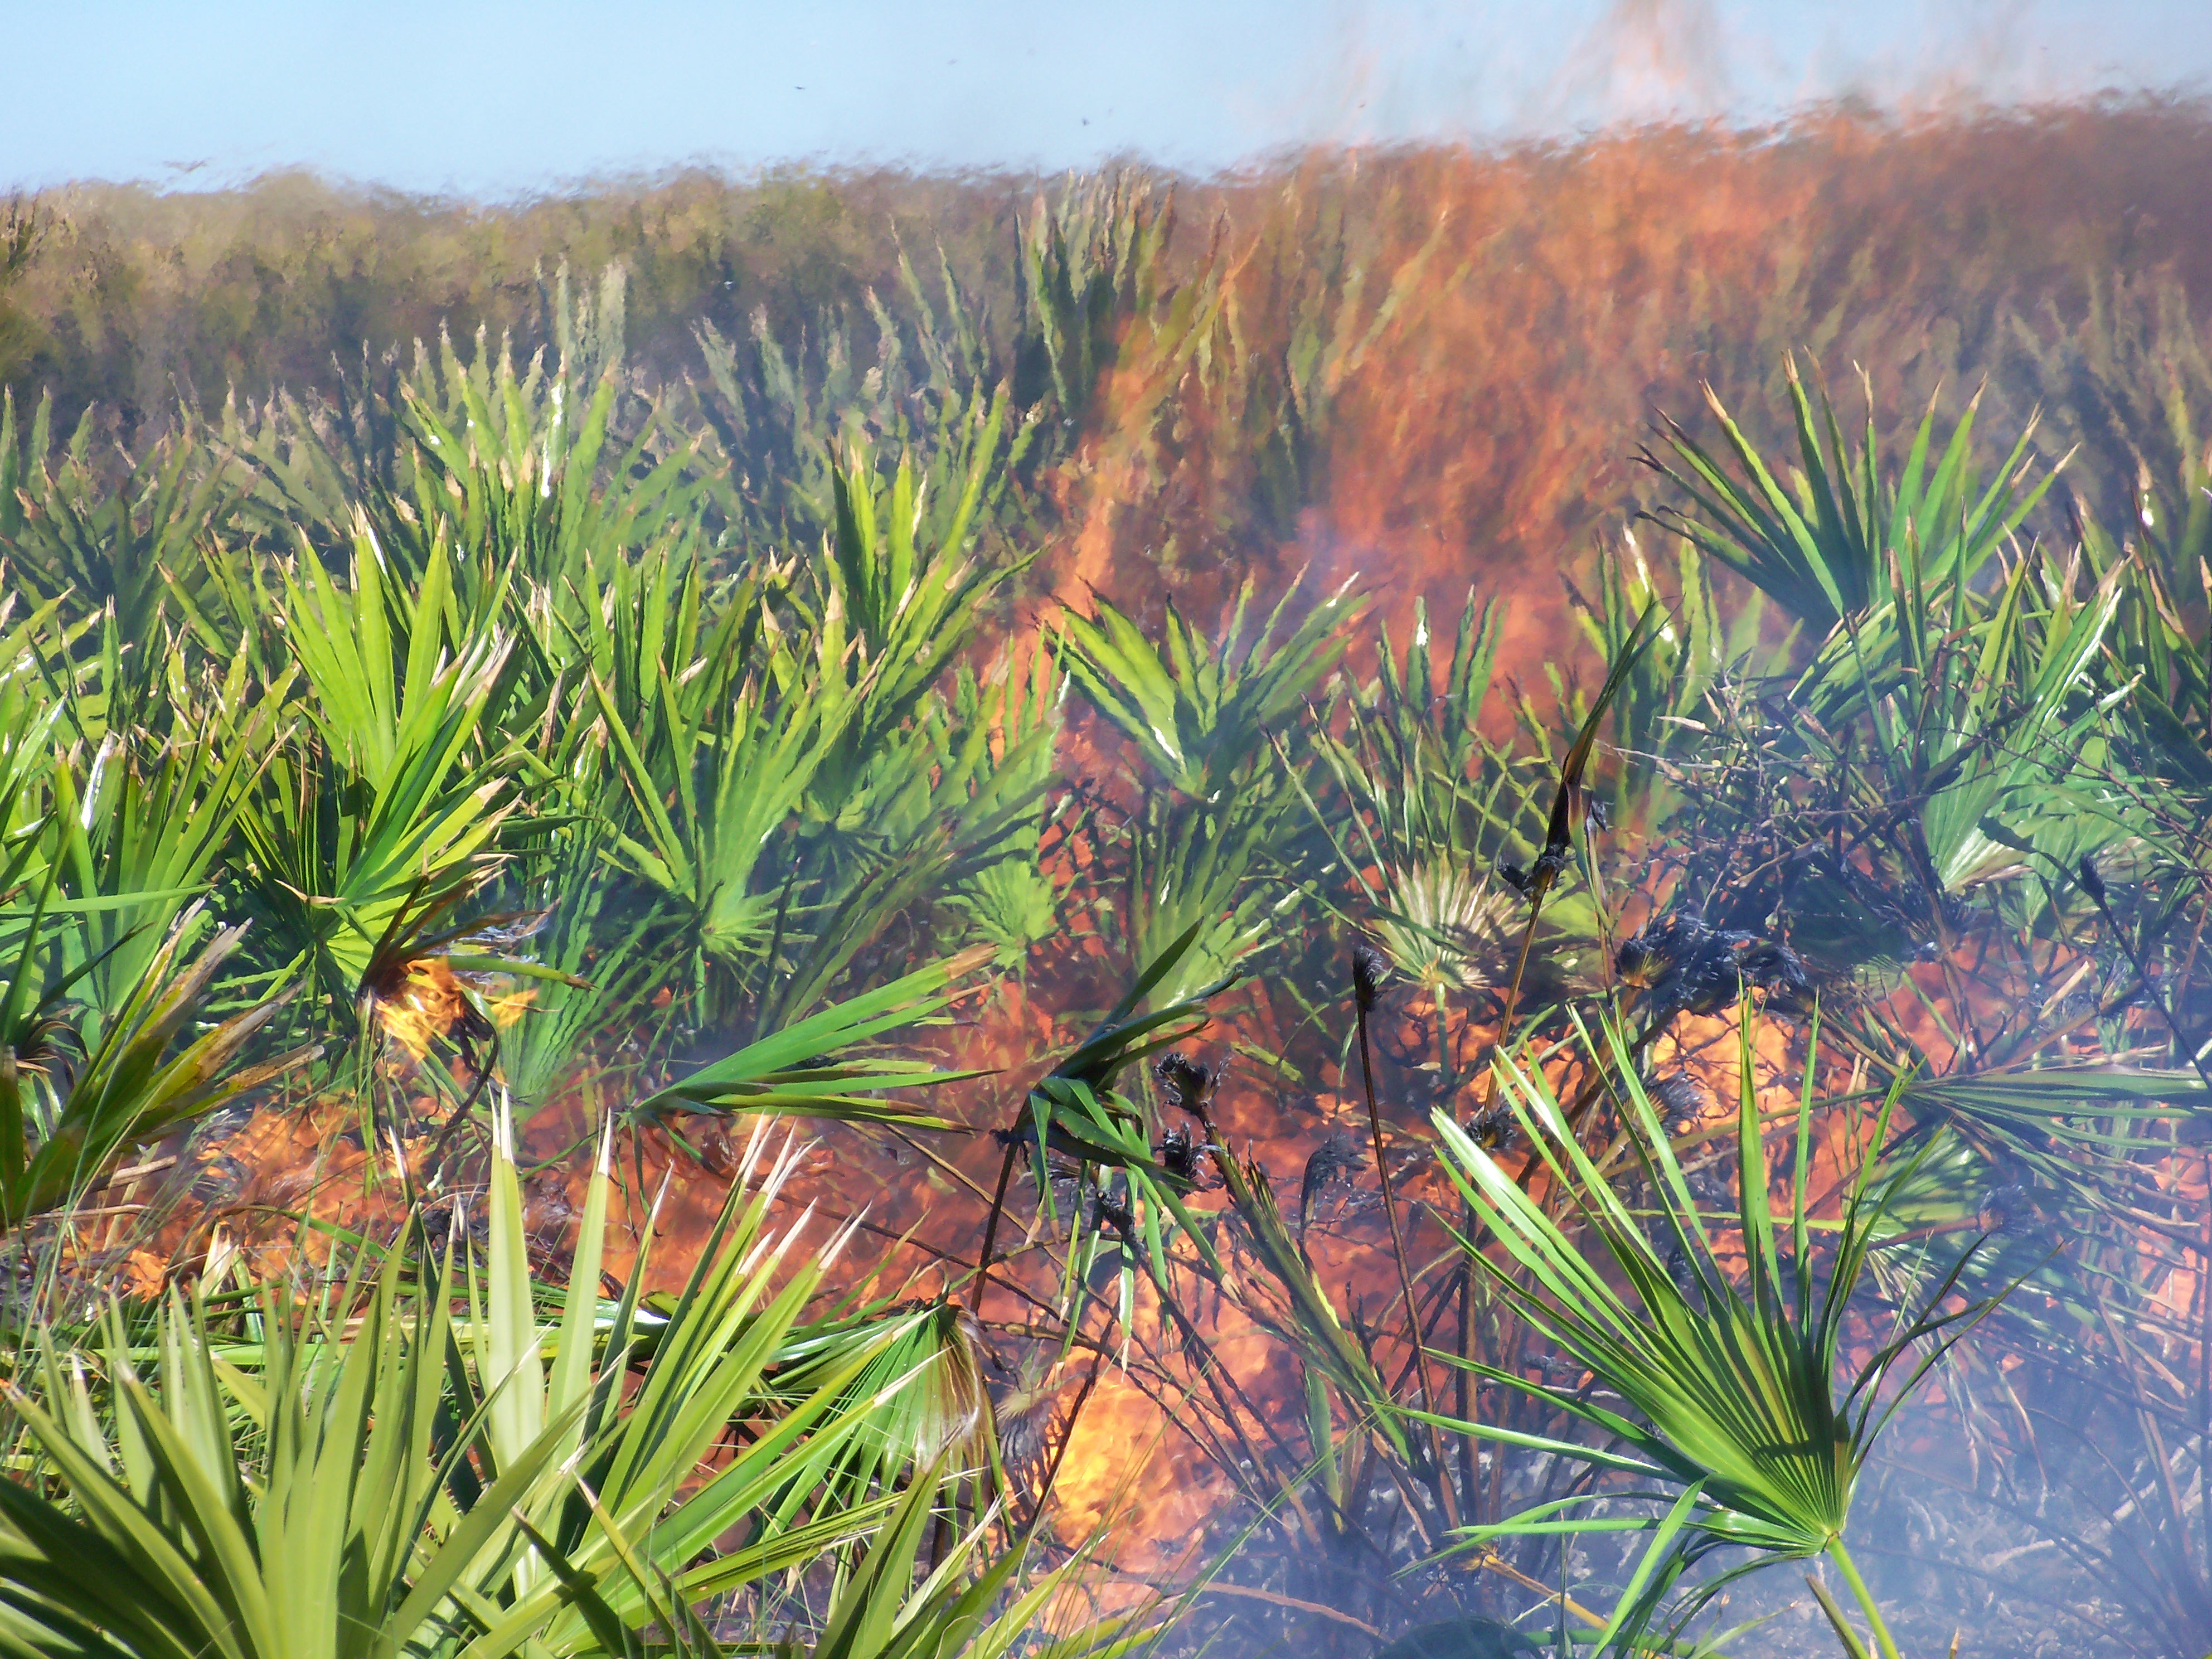 Saw palmetto burning with orange flames during a prescribed burn